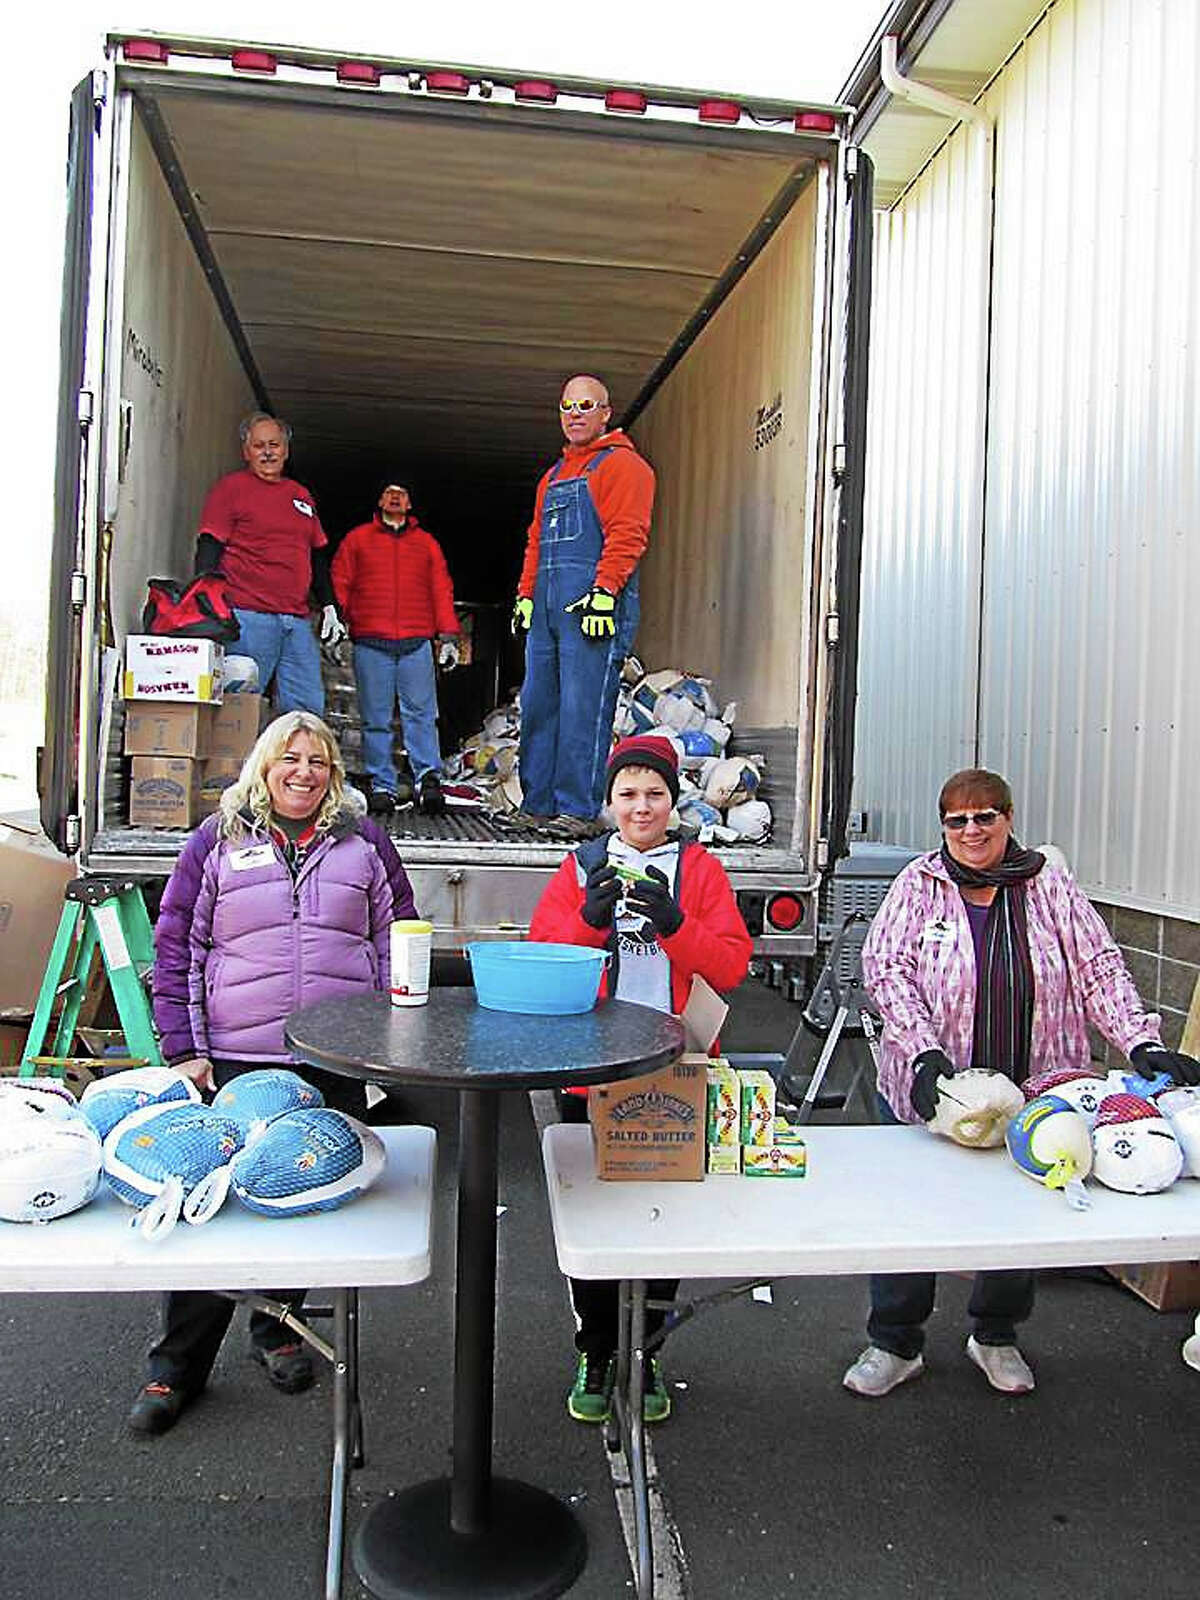 Volunteers from the Middletown Community Thanksgiving Project distributed turkeys this week. Pictured, front row, from left are Gabriele Nyenhuis, Marcus Santamaria, and Helen Roy; in the truck, from left, are Rodney Roy, Steve Koller and Roy J. Cooper.